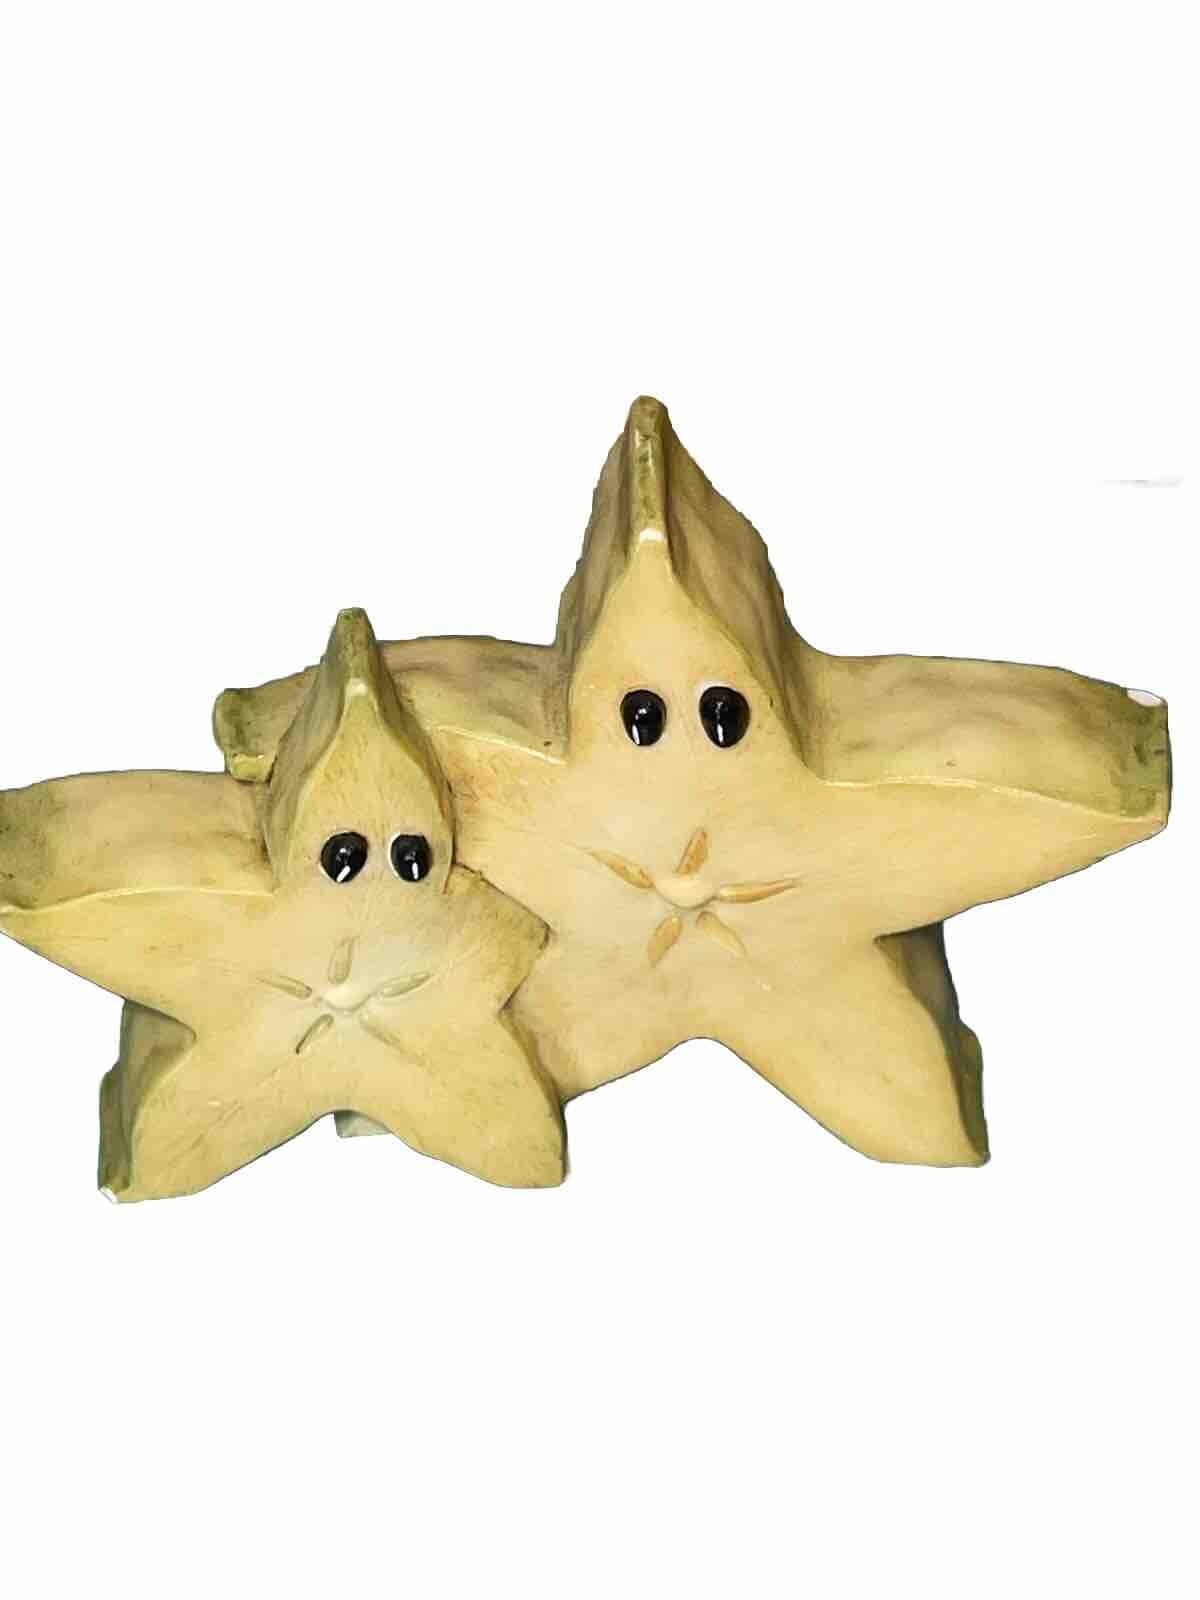 Enesco Home Grown Figurine Rare Vintage Starfruit Collectibles 2007 Chips